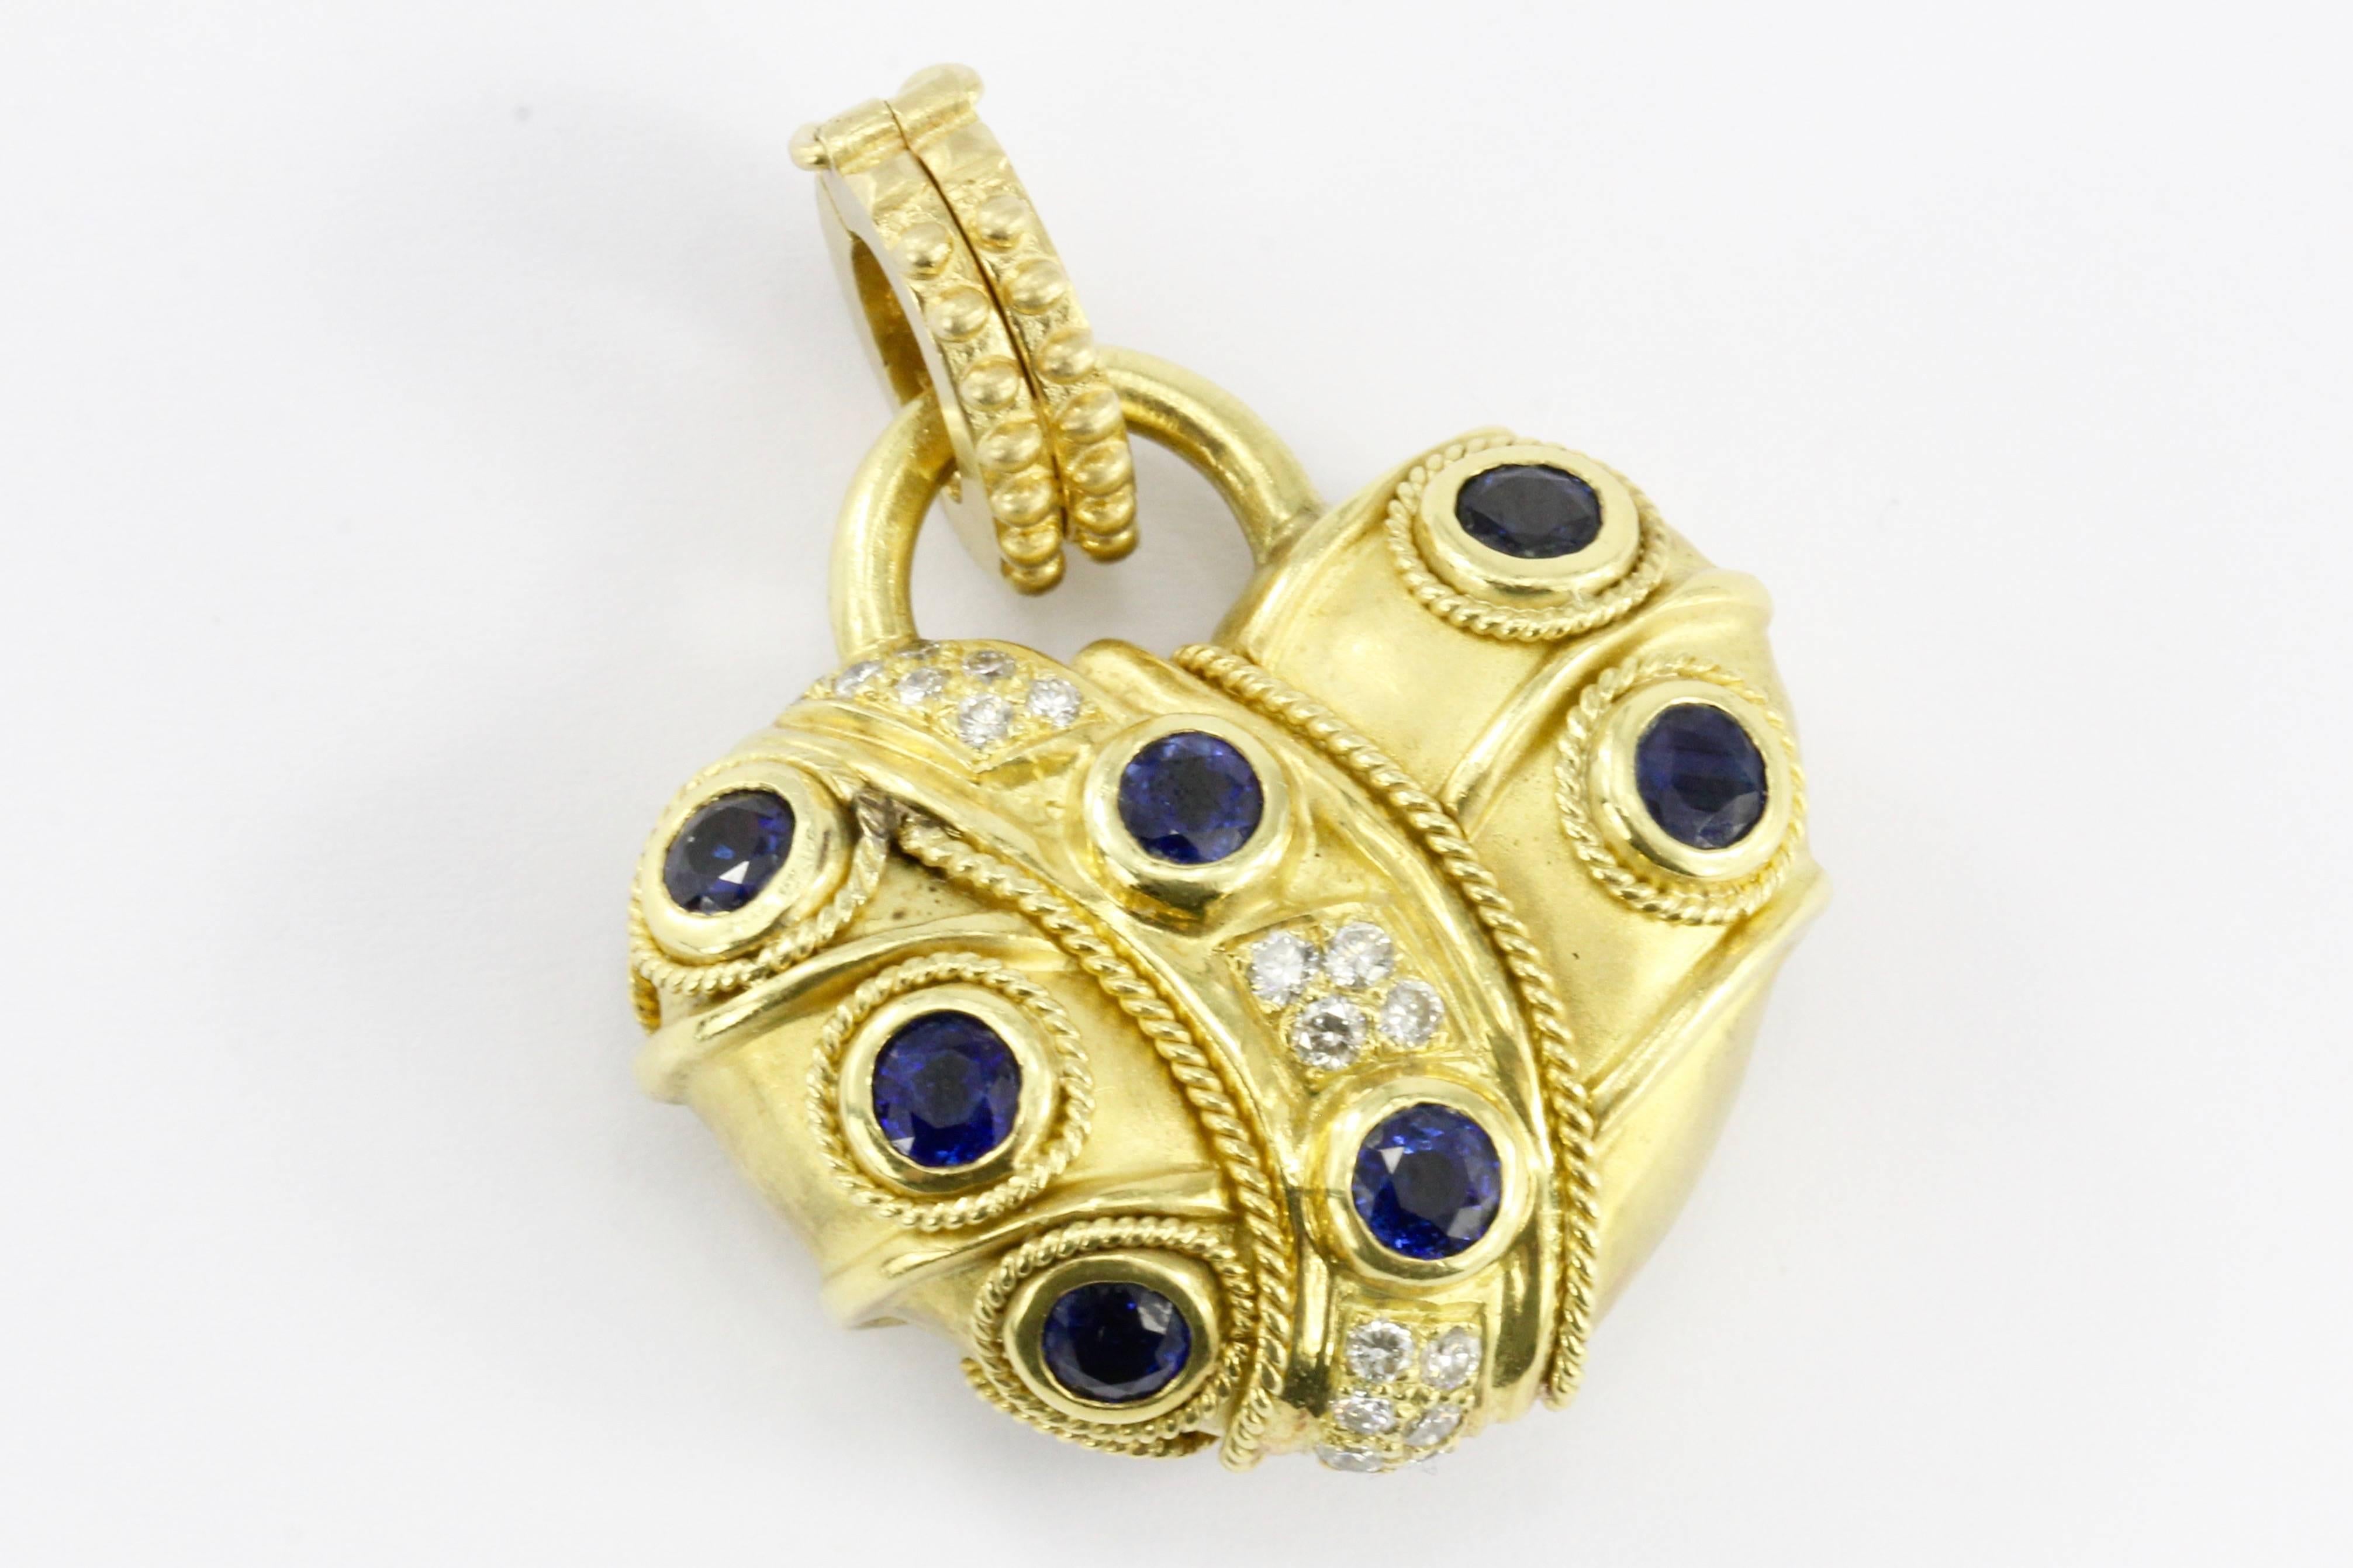 Era: Modern

Composition: 18K Brushed Yellow Gold

Primary Stone: Natural Sapphire 

Primary Stone Carat Weight: 2.5 CTW

Secondary Stone: Natural Ruby

Secondary Stone Carat Weight: 2.5 CTW

Tertiary Stone: Diamond

Tertiary Stone Carat Weight: .50